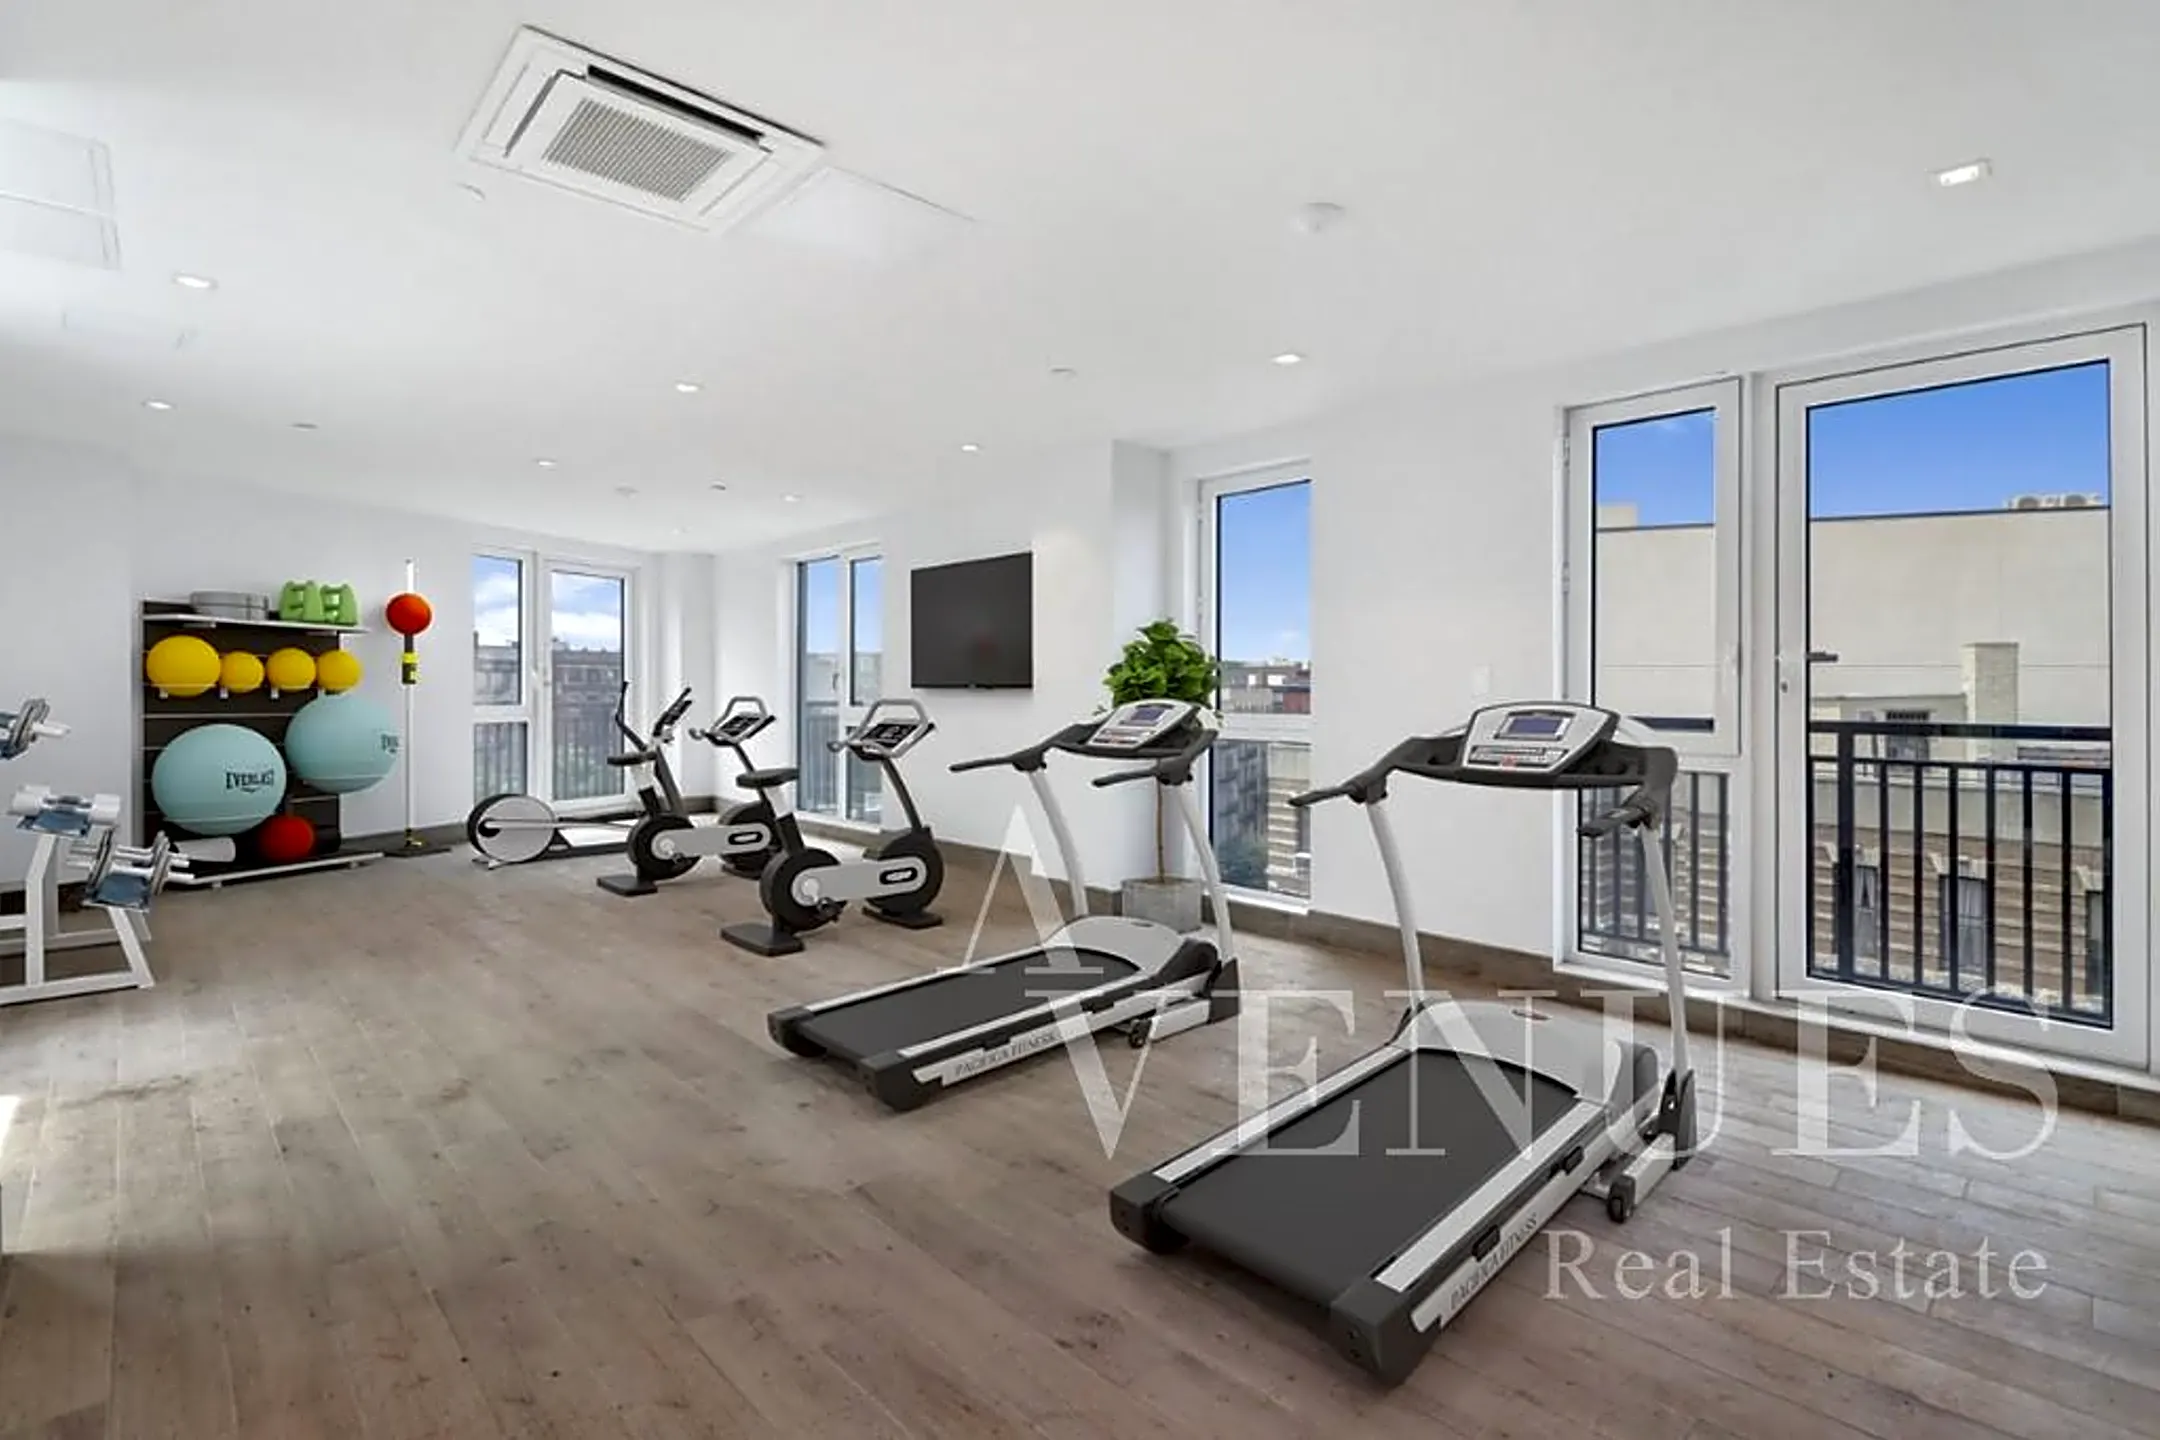 Fitness Weight Room - 469 Convent Ave - New York, NY